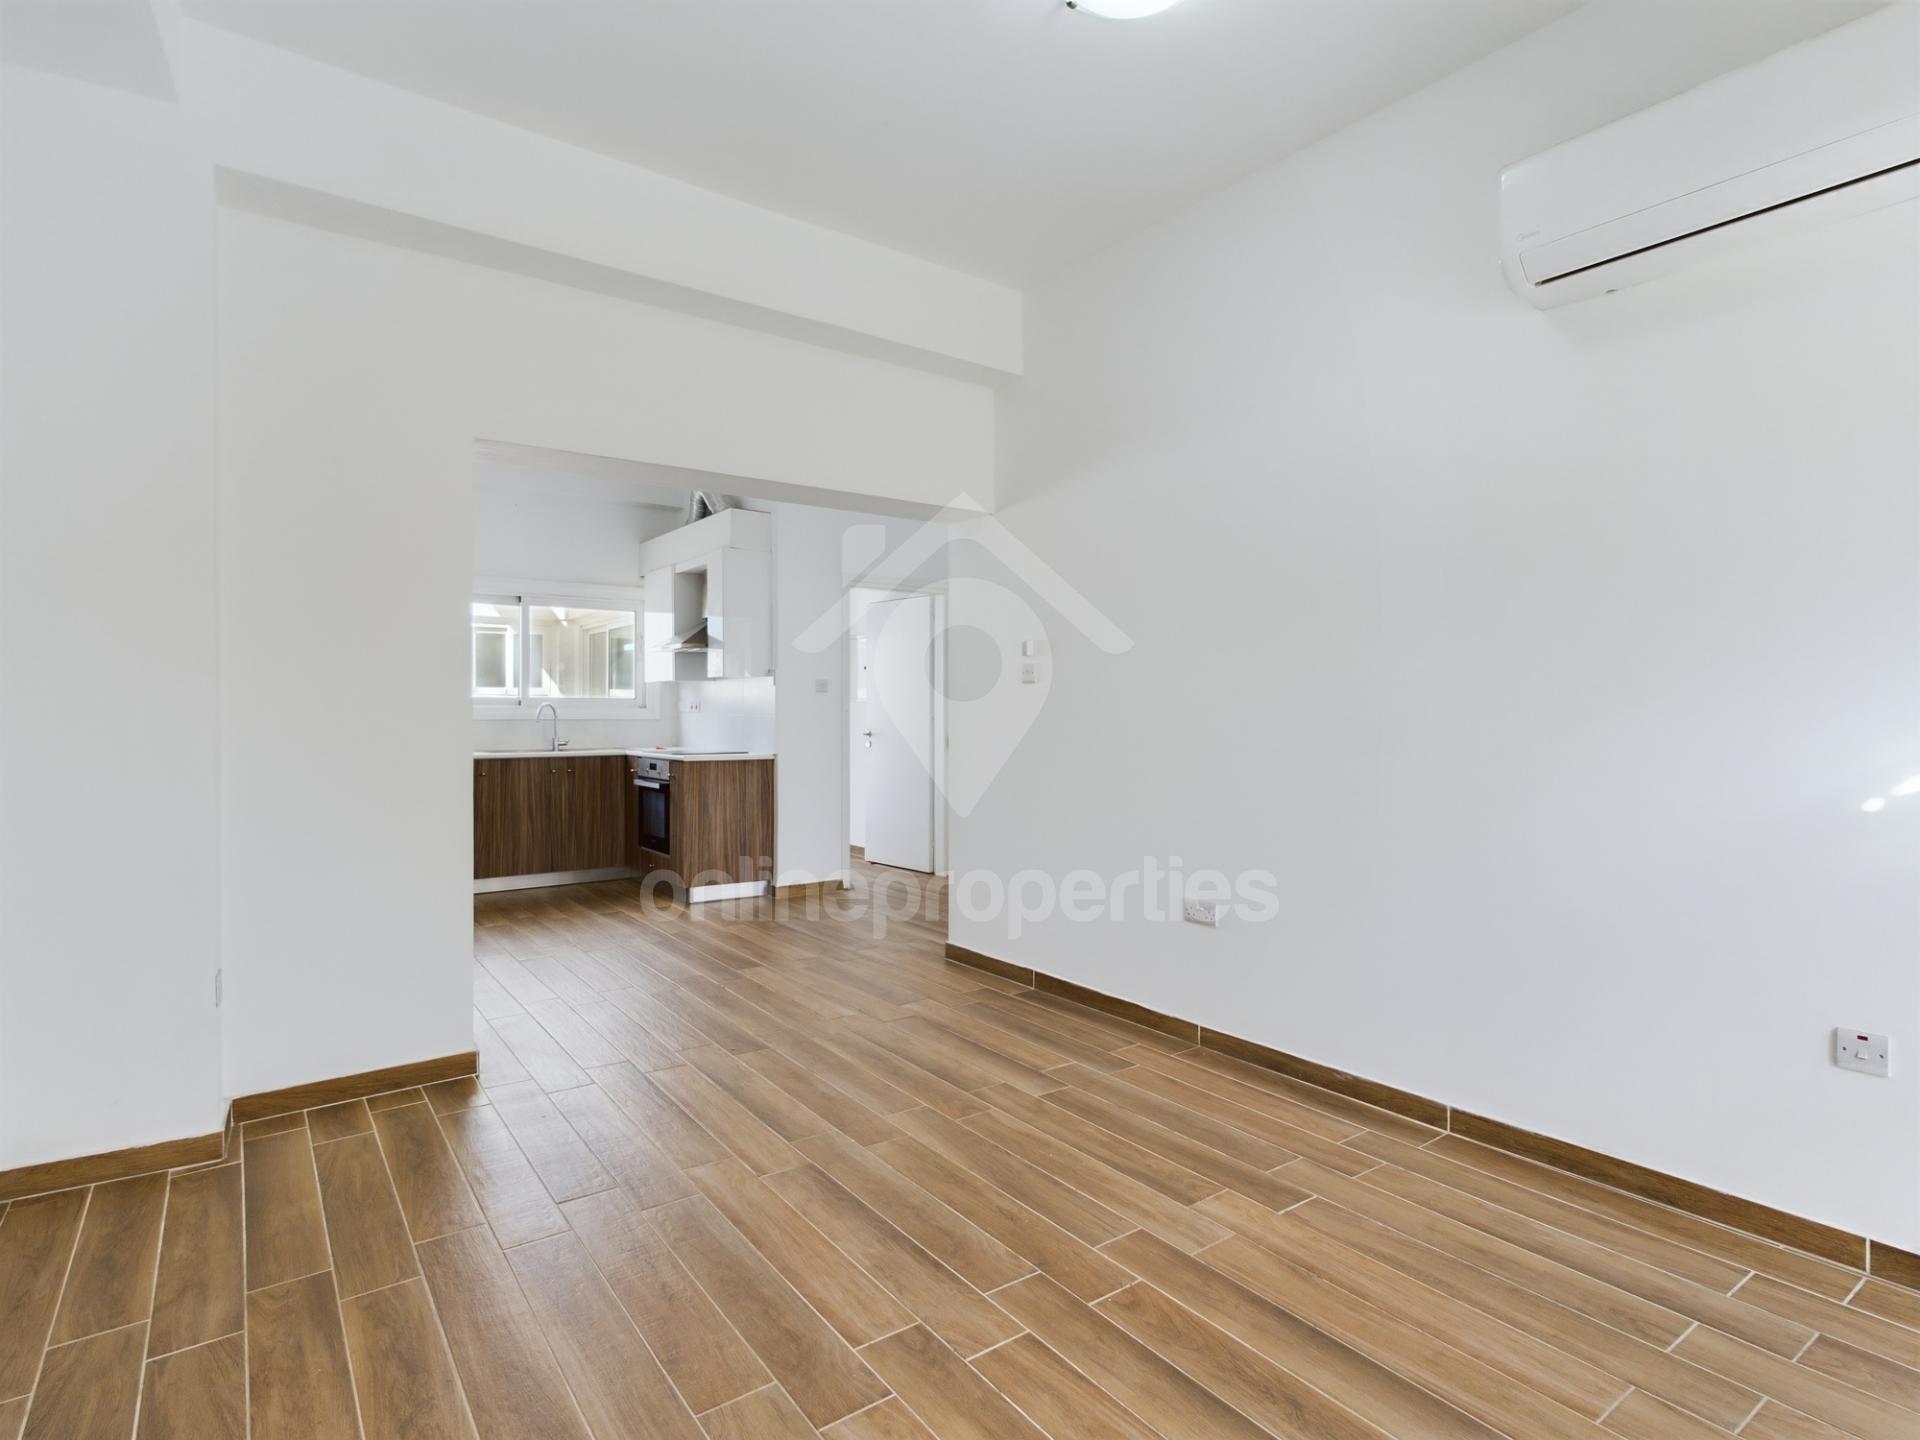 Furnished spacious apartment in the heart of the city 